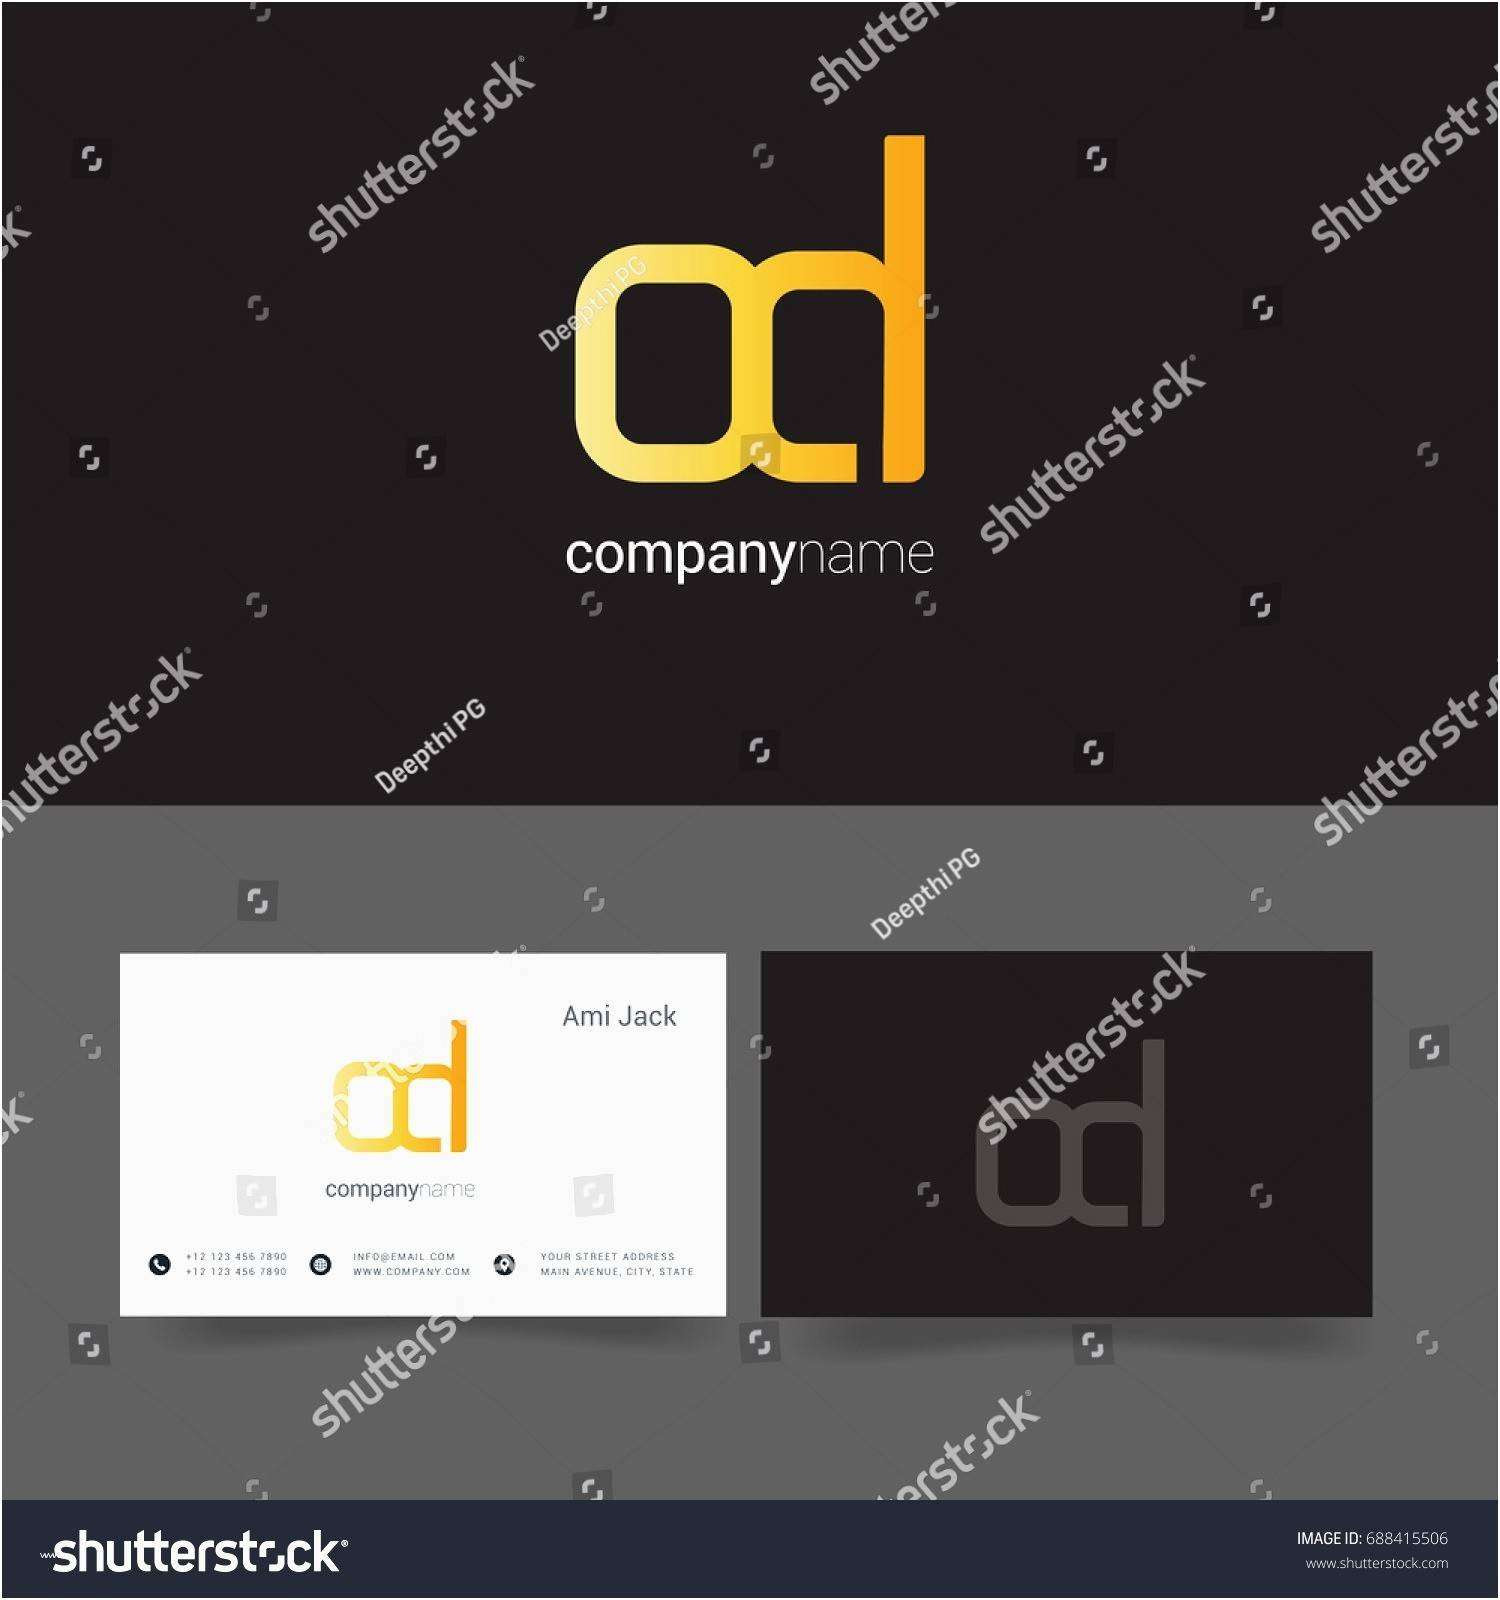 Free Business Card Templates Caquetapositivo Of Business Card Sample Template